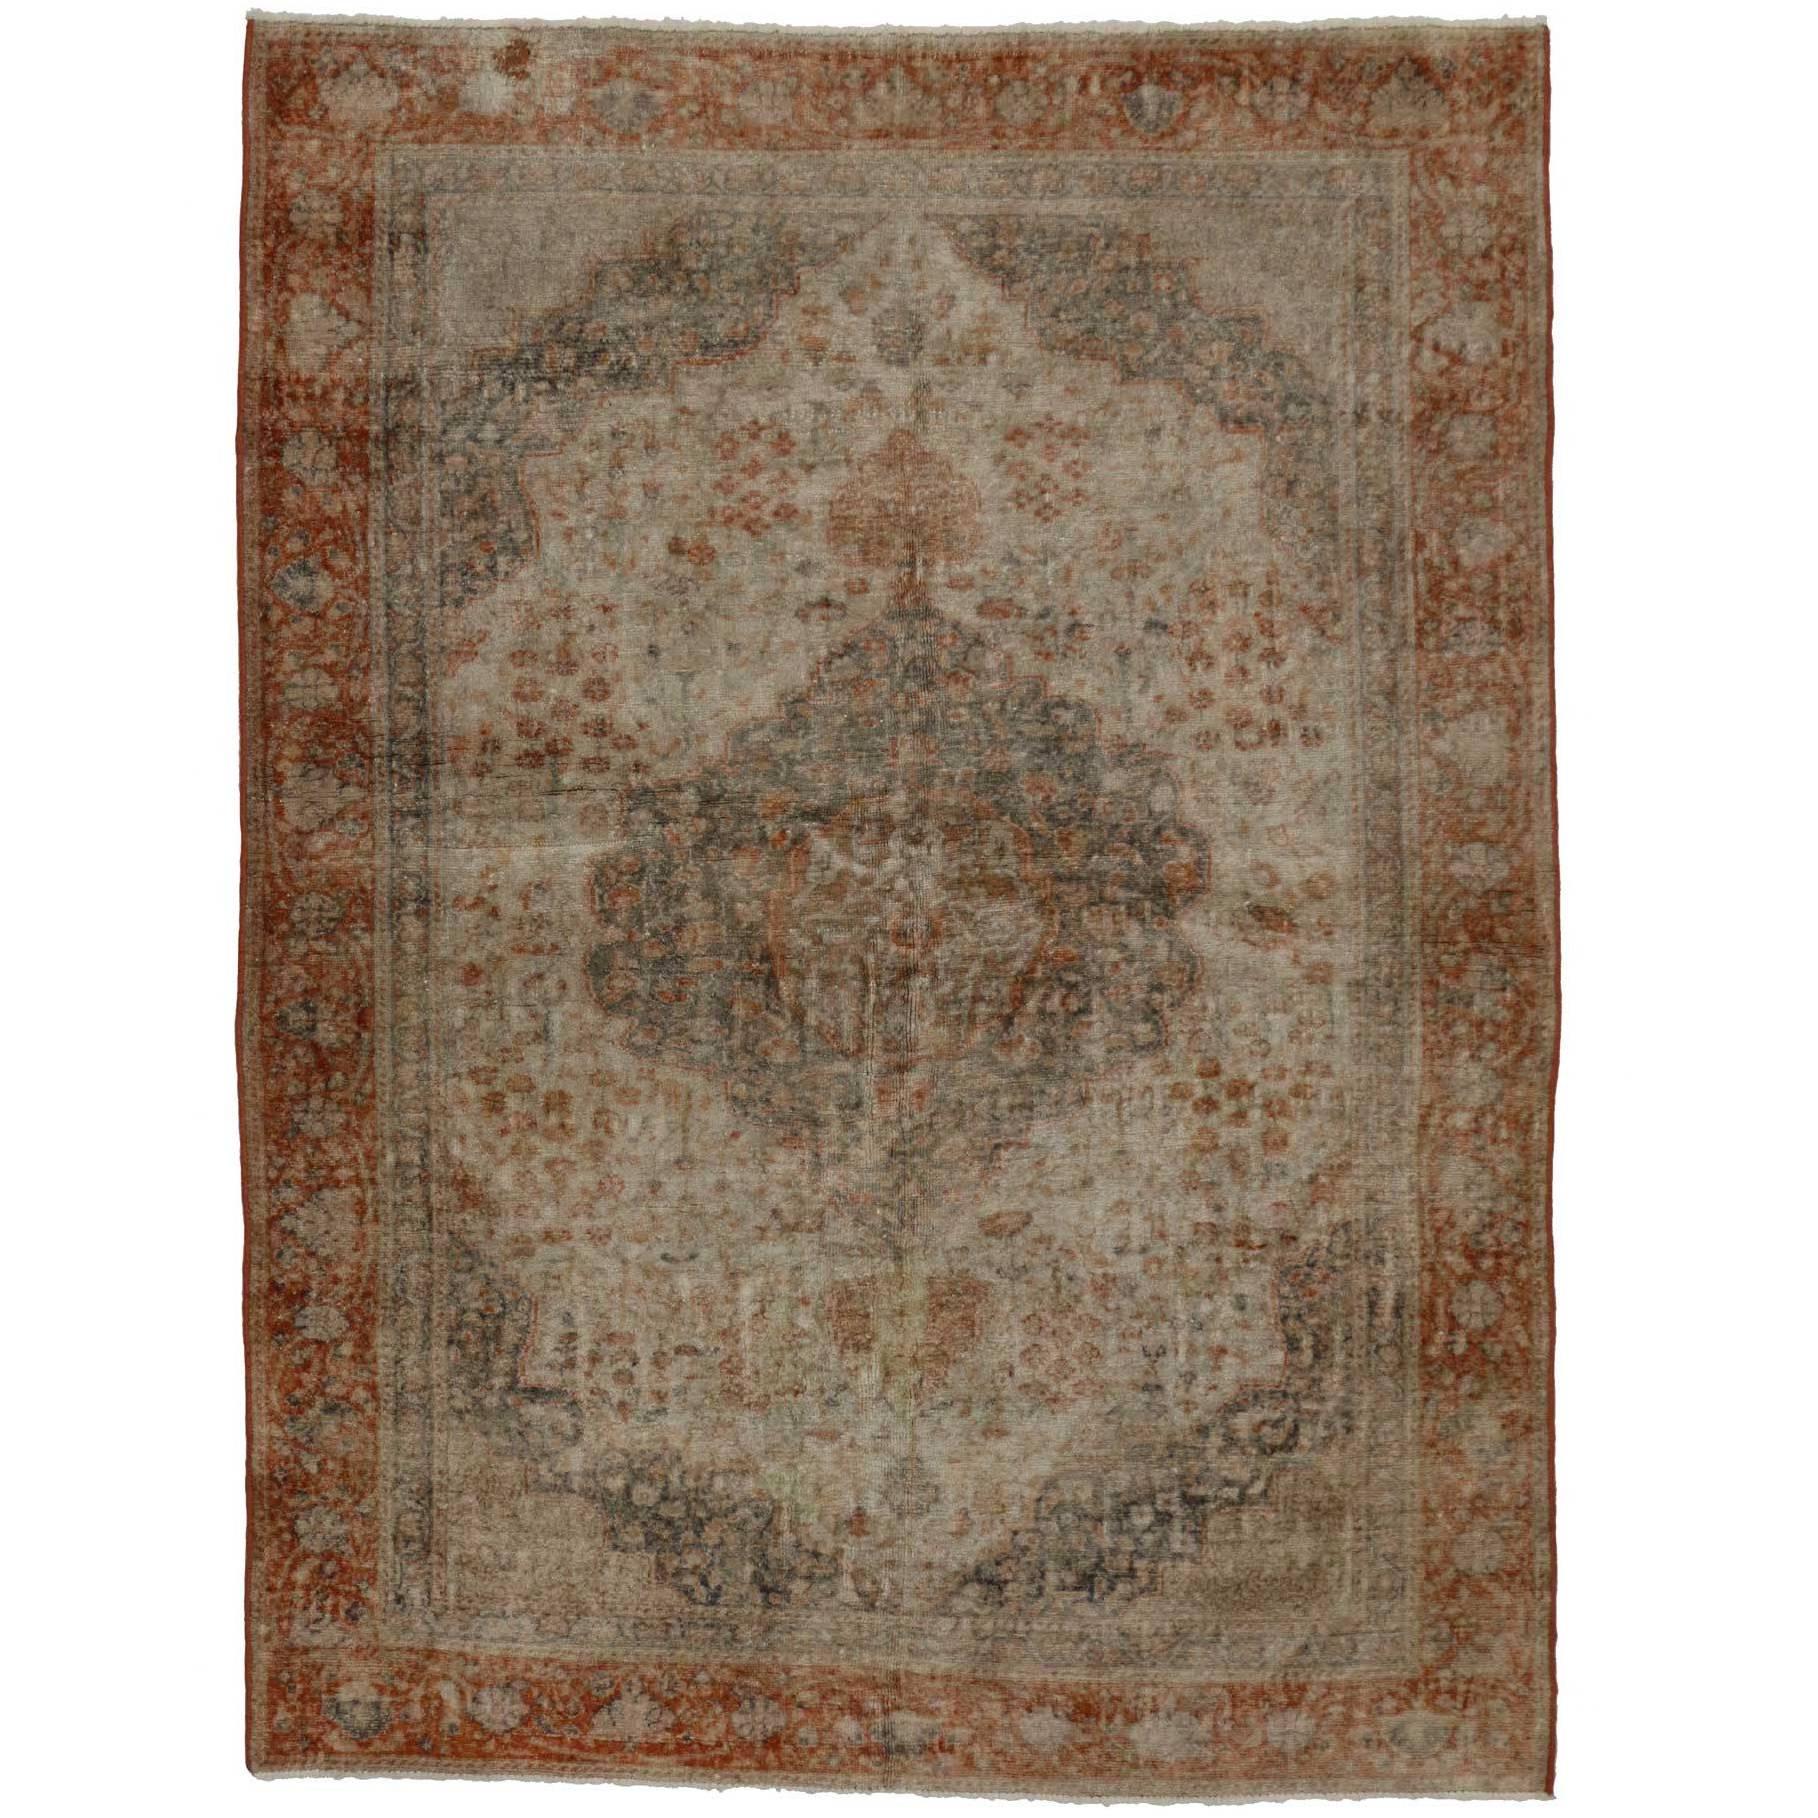 Distressed Vintage Turkish Oushak Rug with Traditional Style, Foyer or Entry Rug